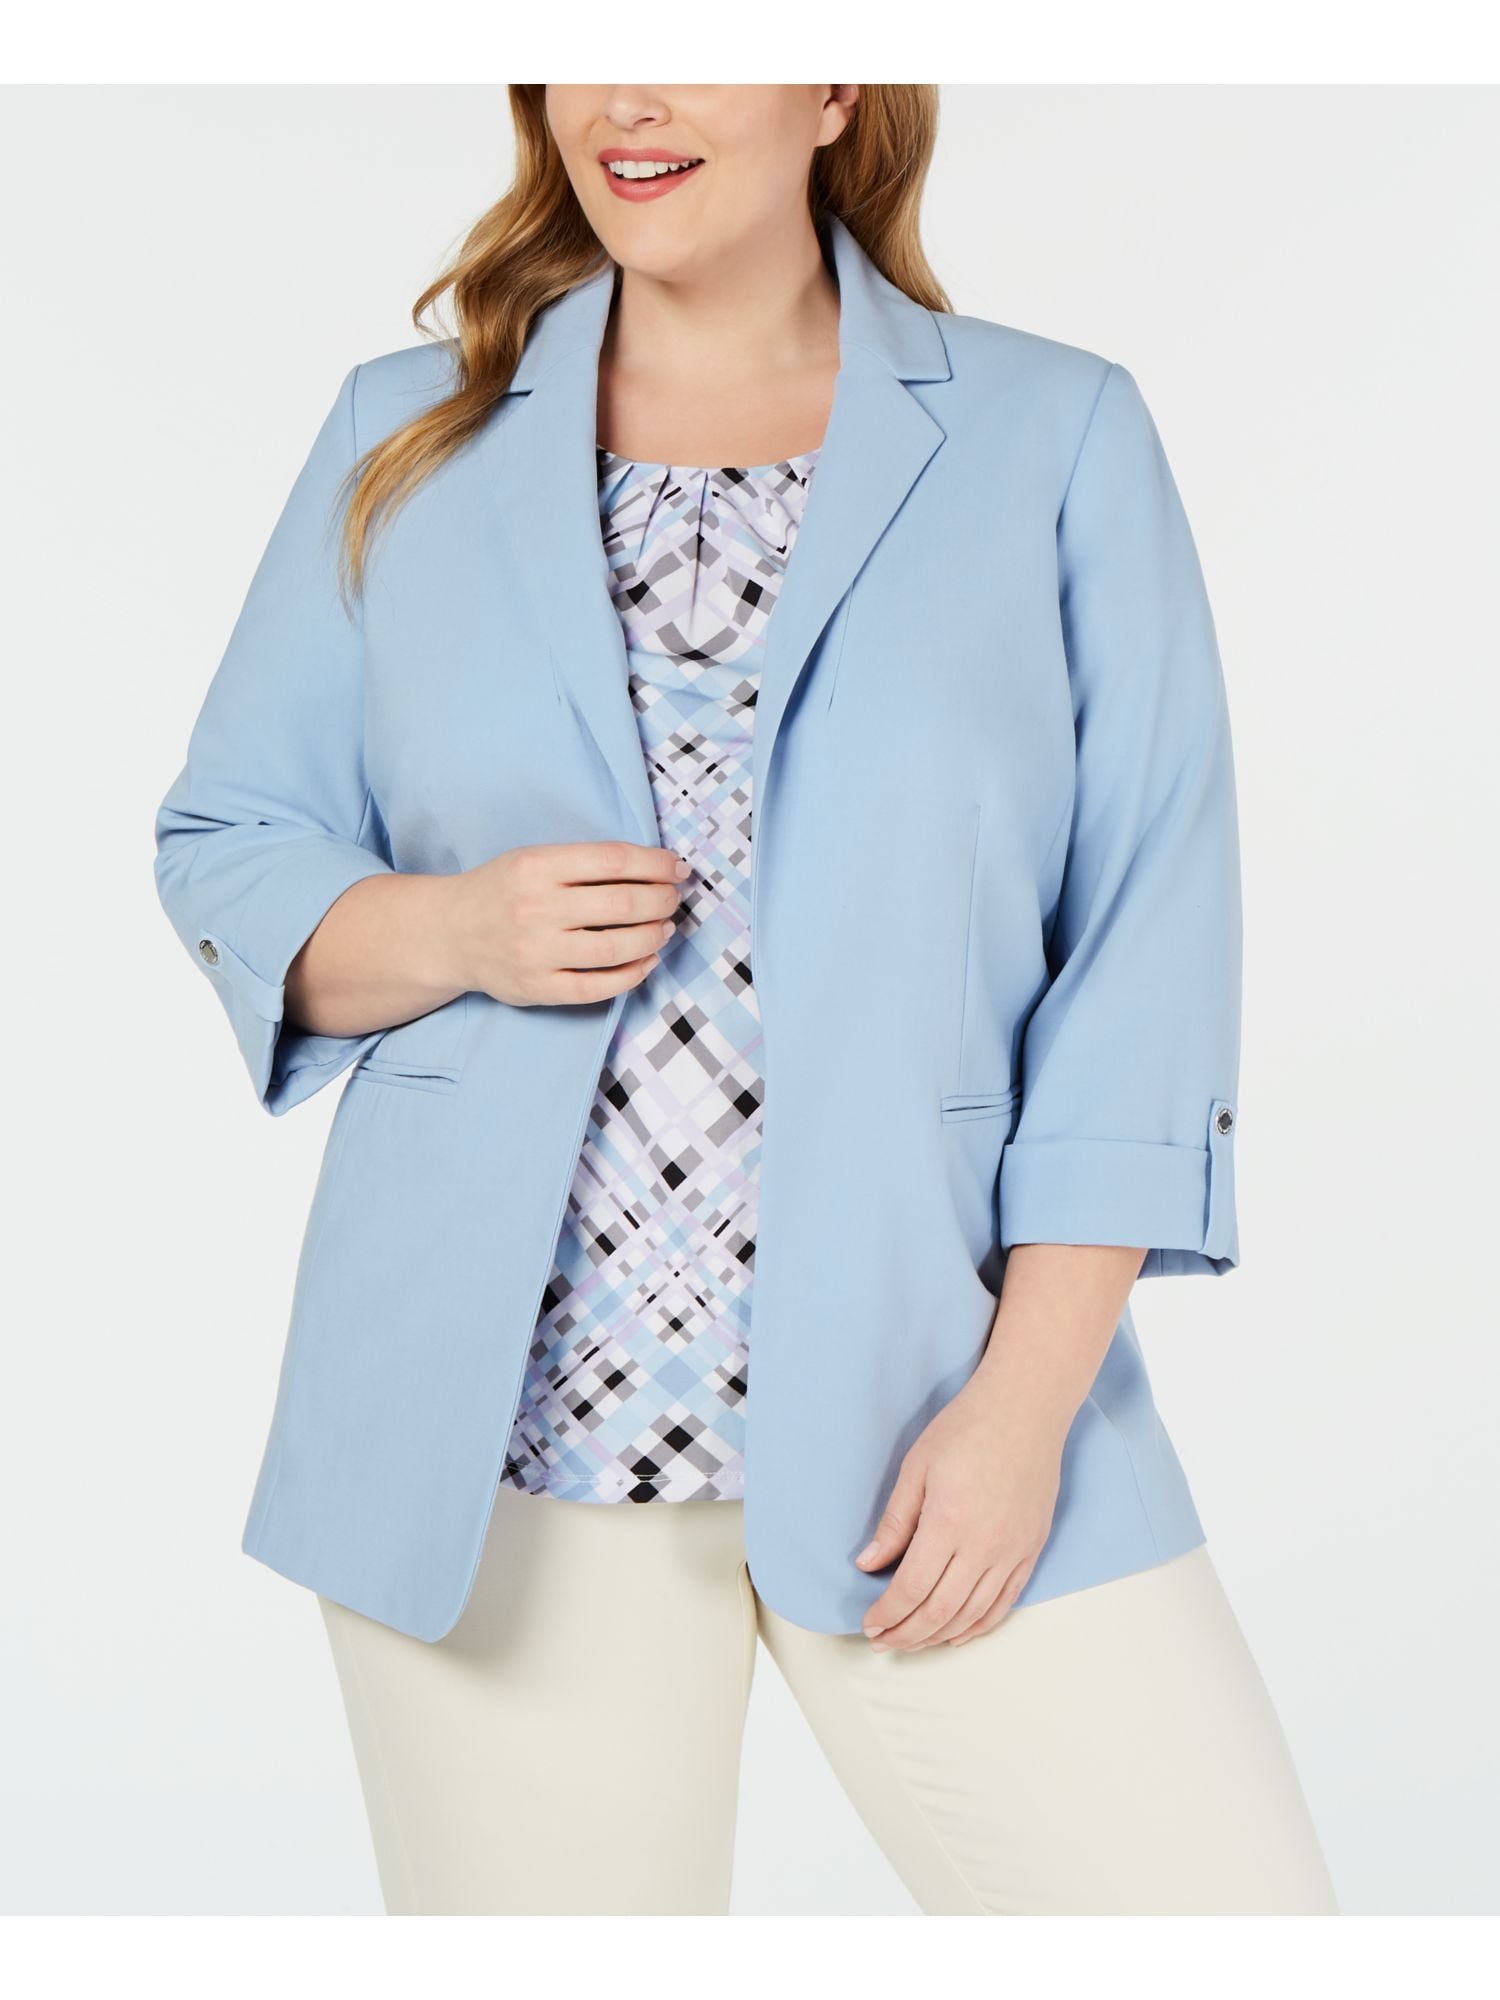 casual blue blazer outfit